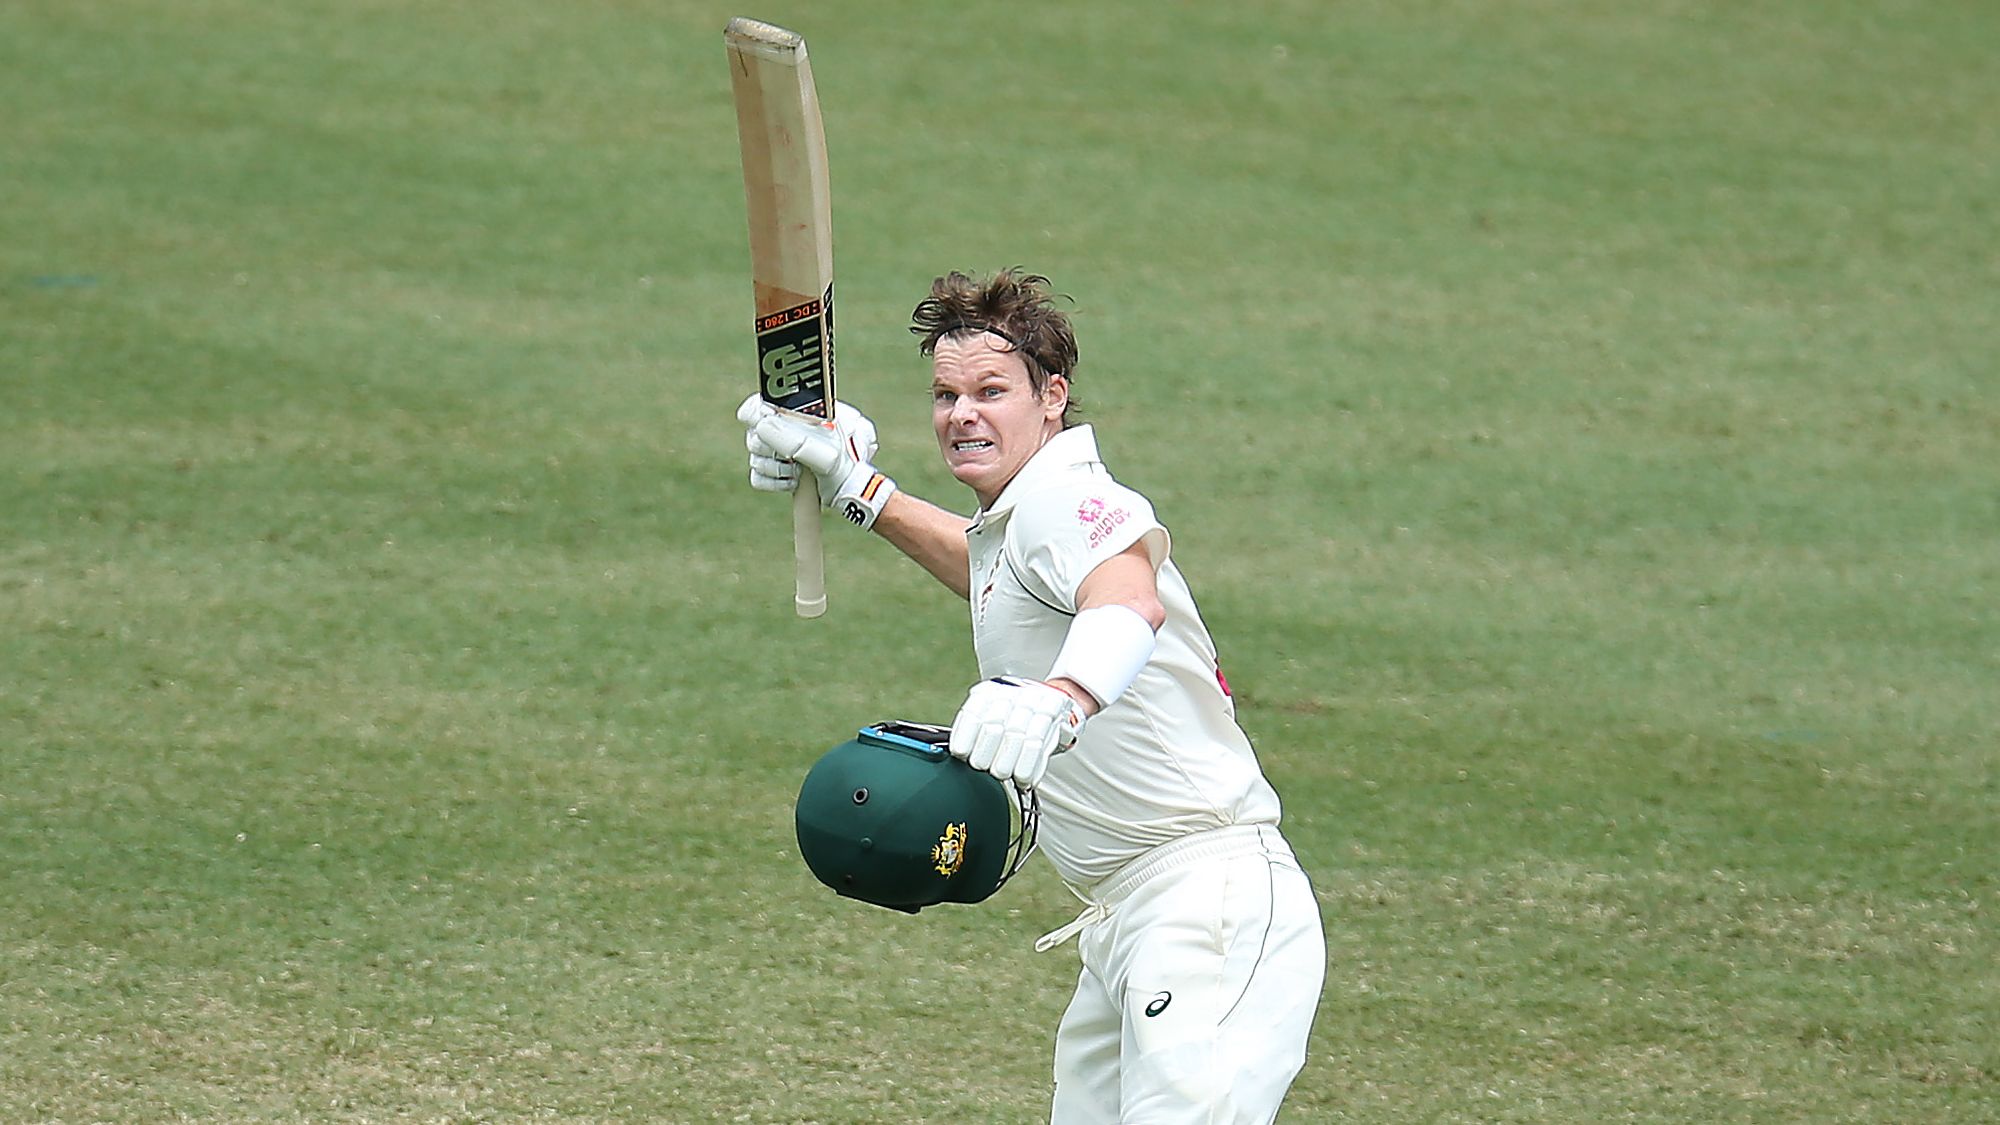 Steve Smith issues a fiery retort to critics after scoring drought-busting century at the SCG